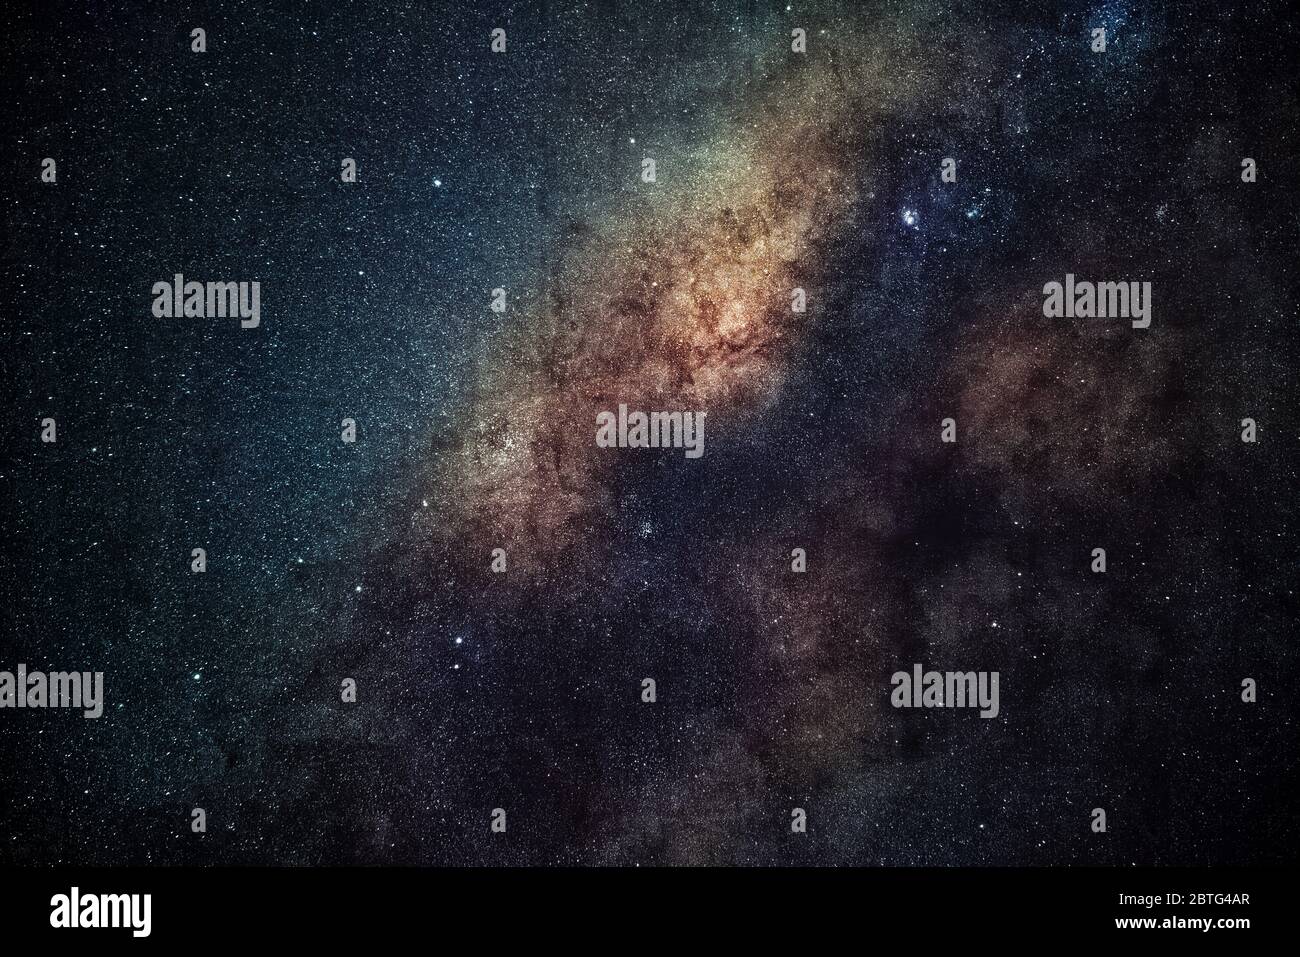 A view of the Center of the Milky Way galaxy. Stock Photo